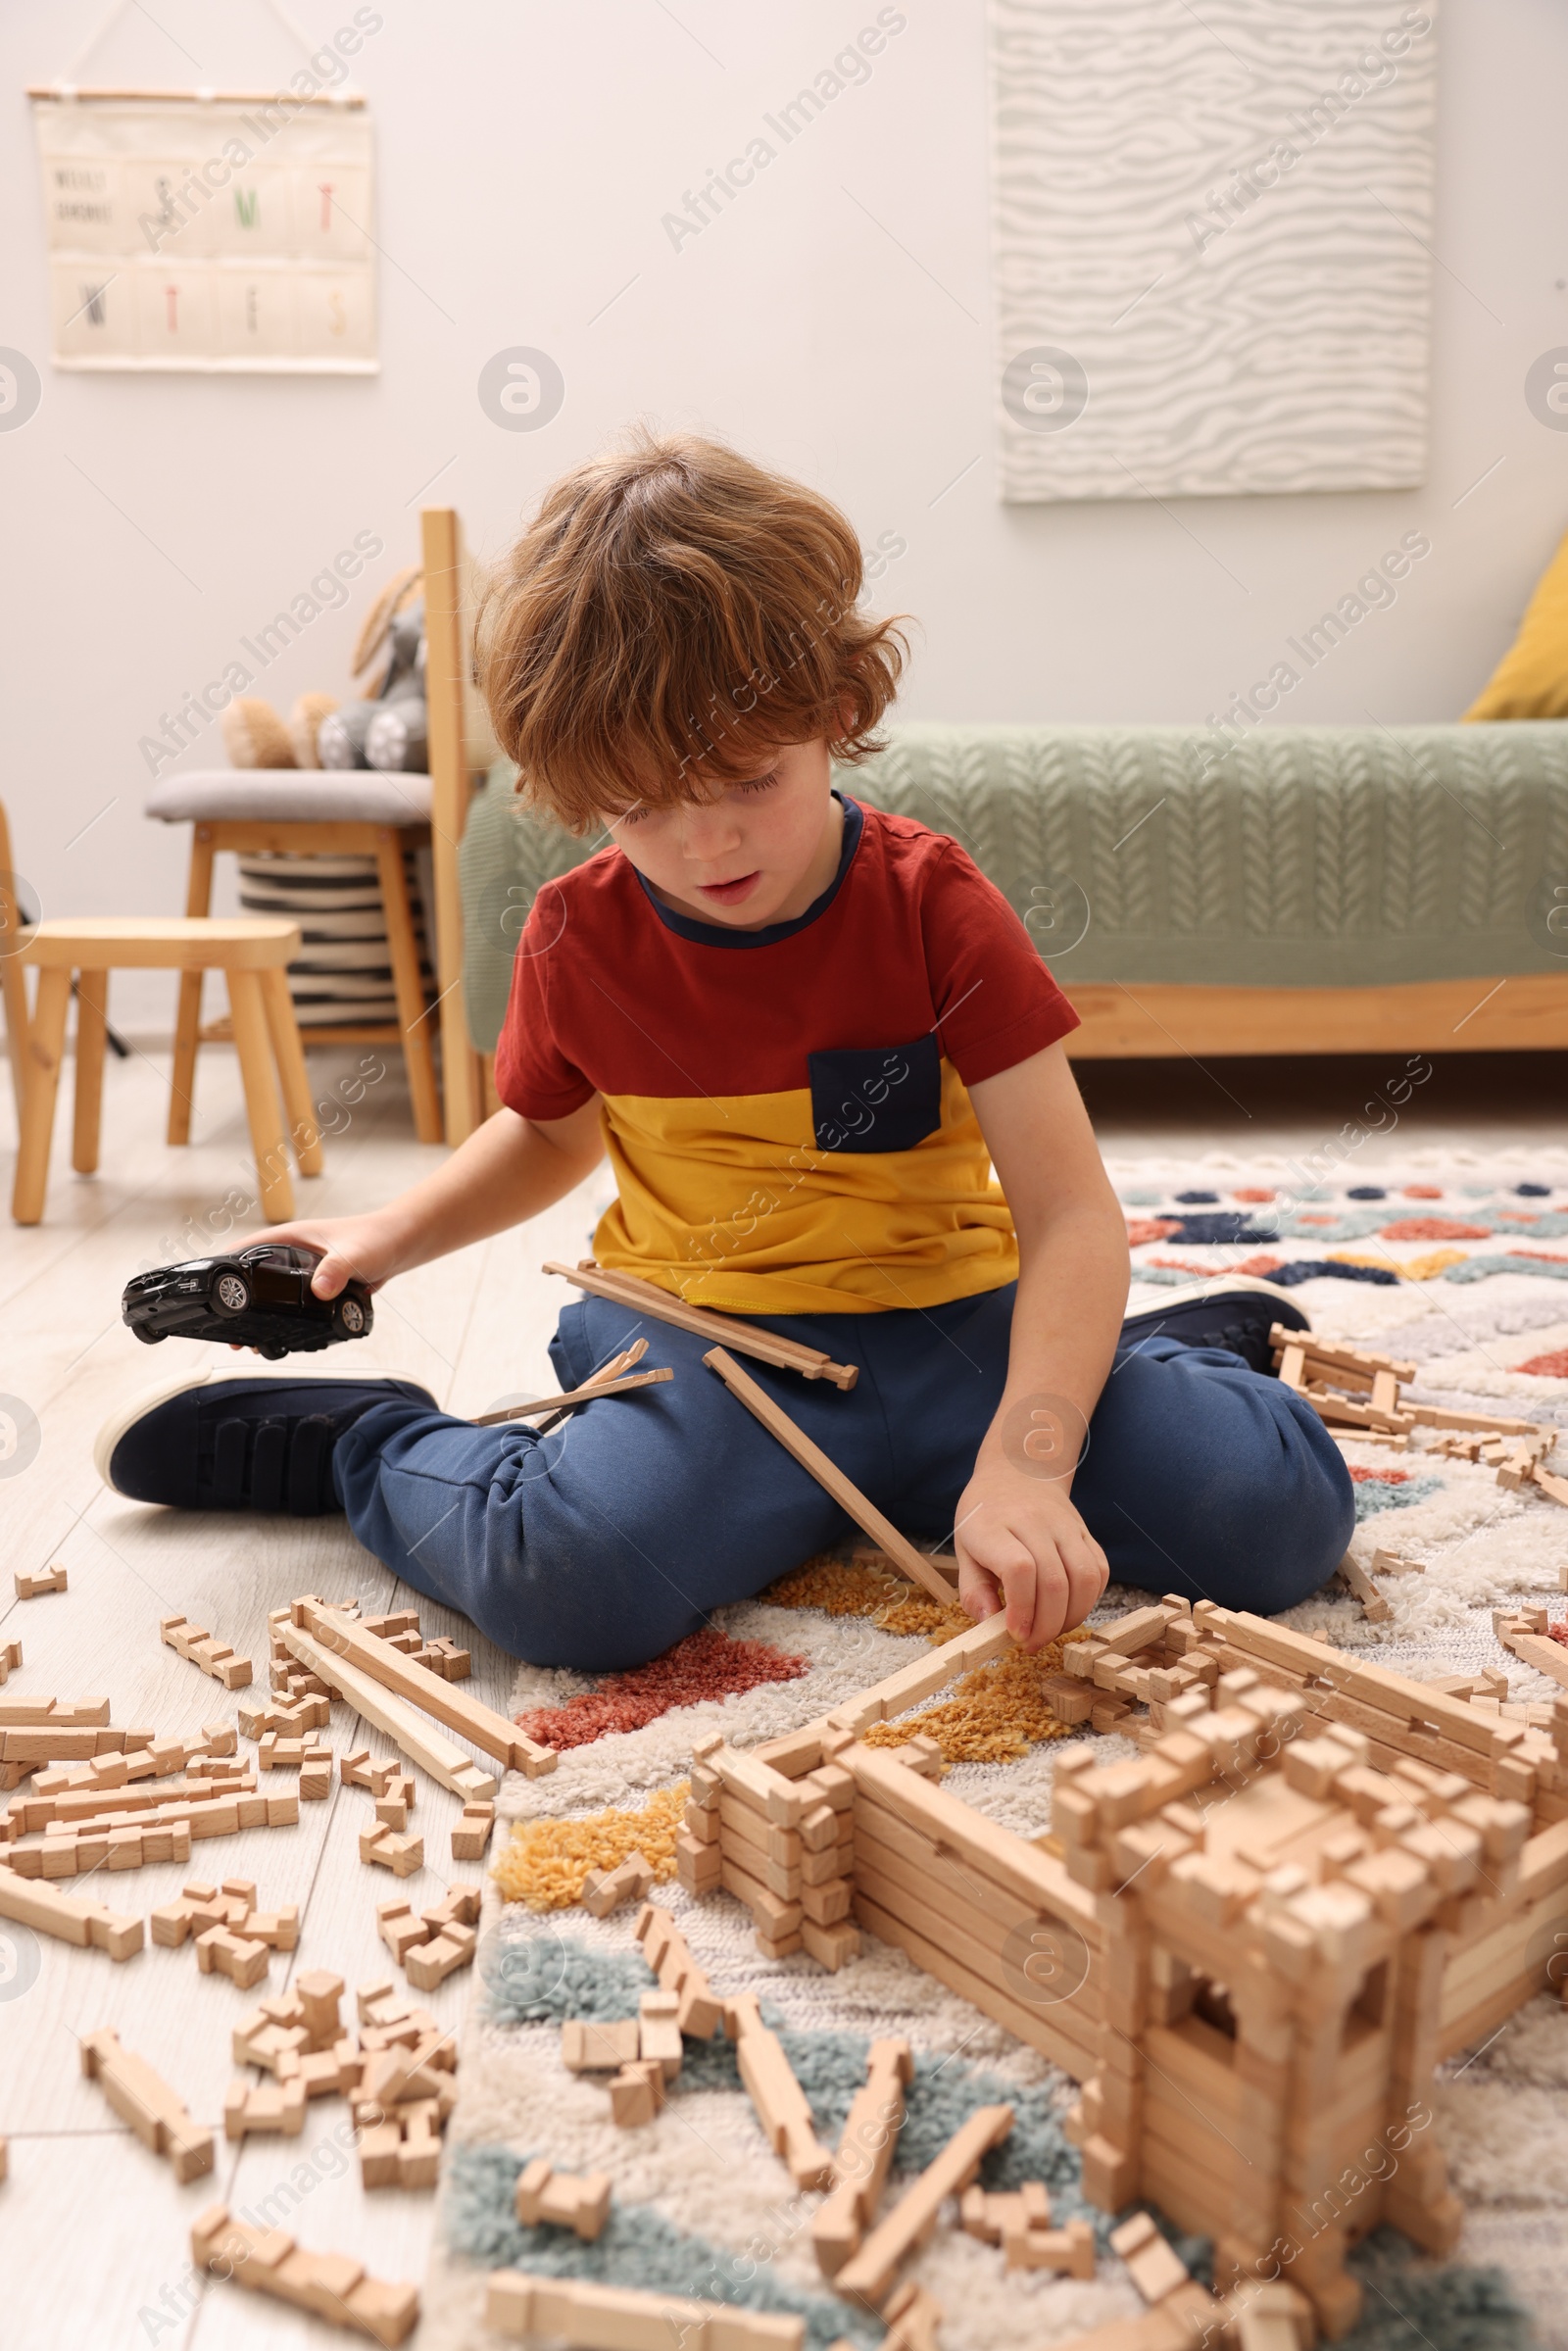 Photo of Little boy playing with wooden construction set on carpet in room. Child's toy